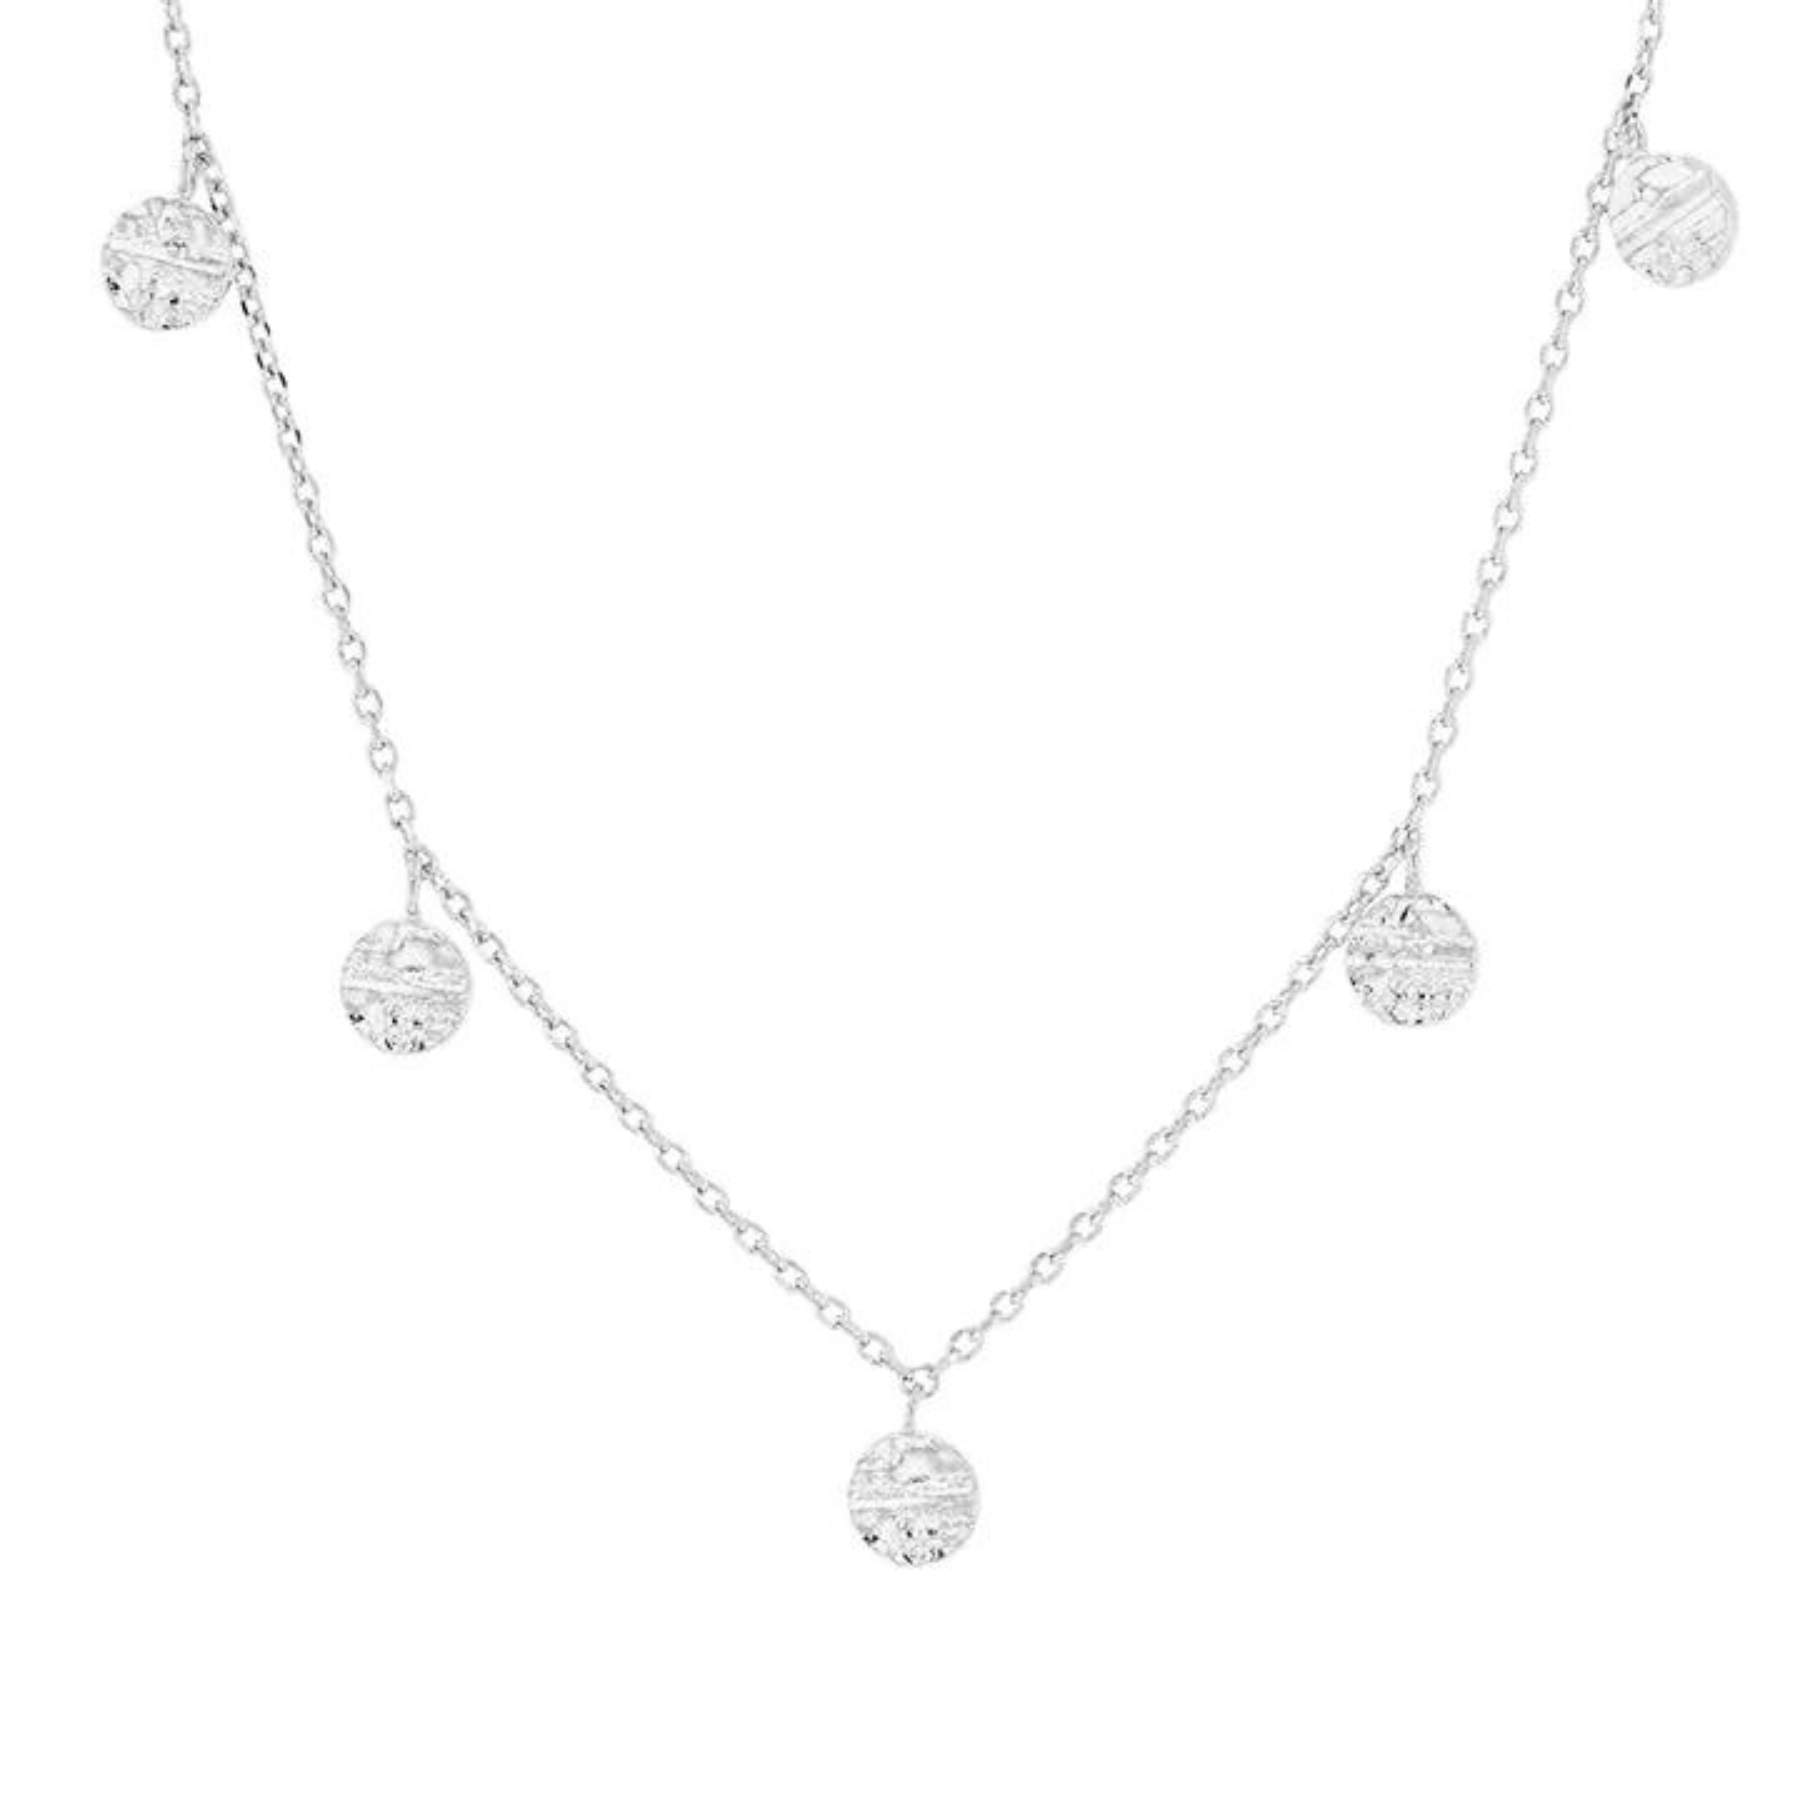 Jolie and Deen - Lainy Necklace - Silver